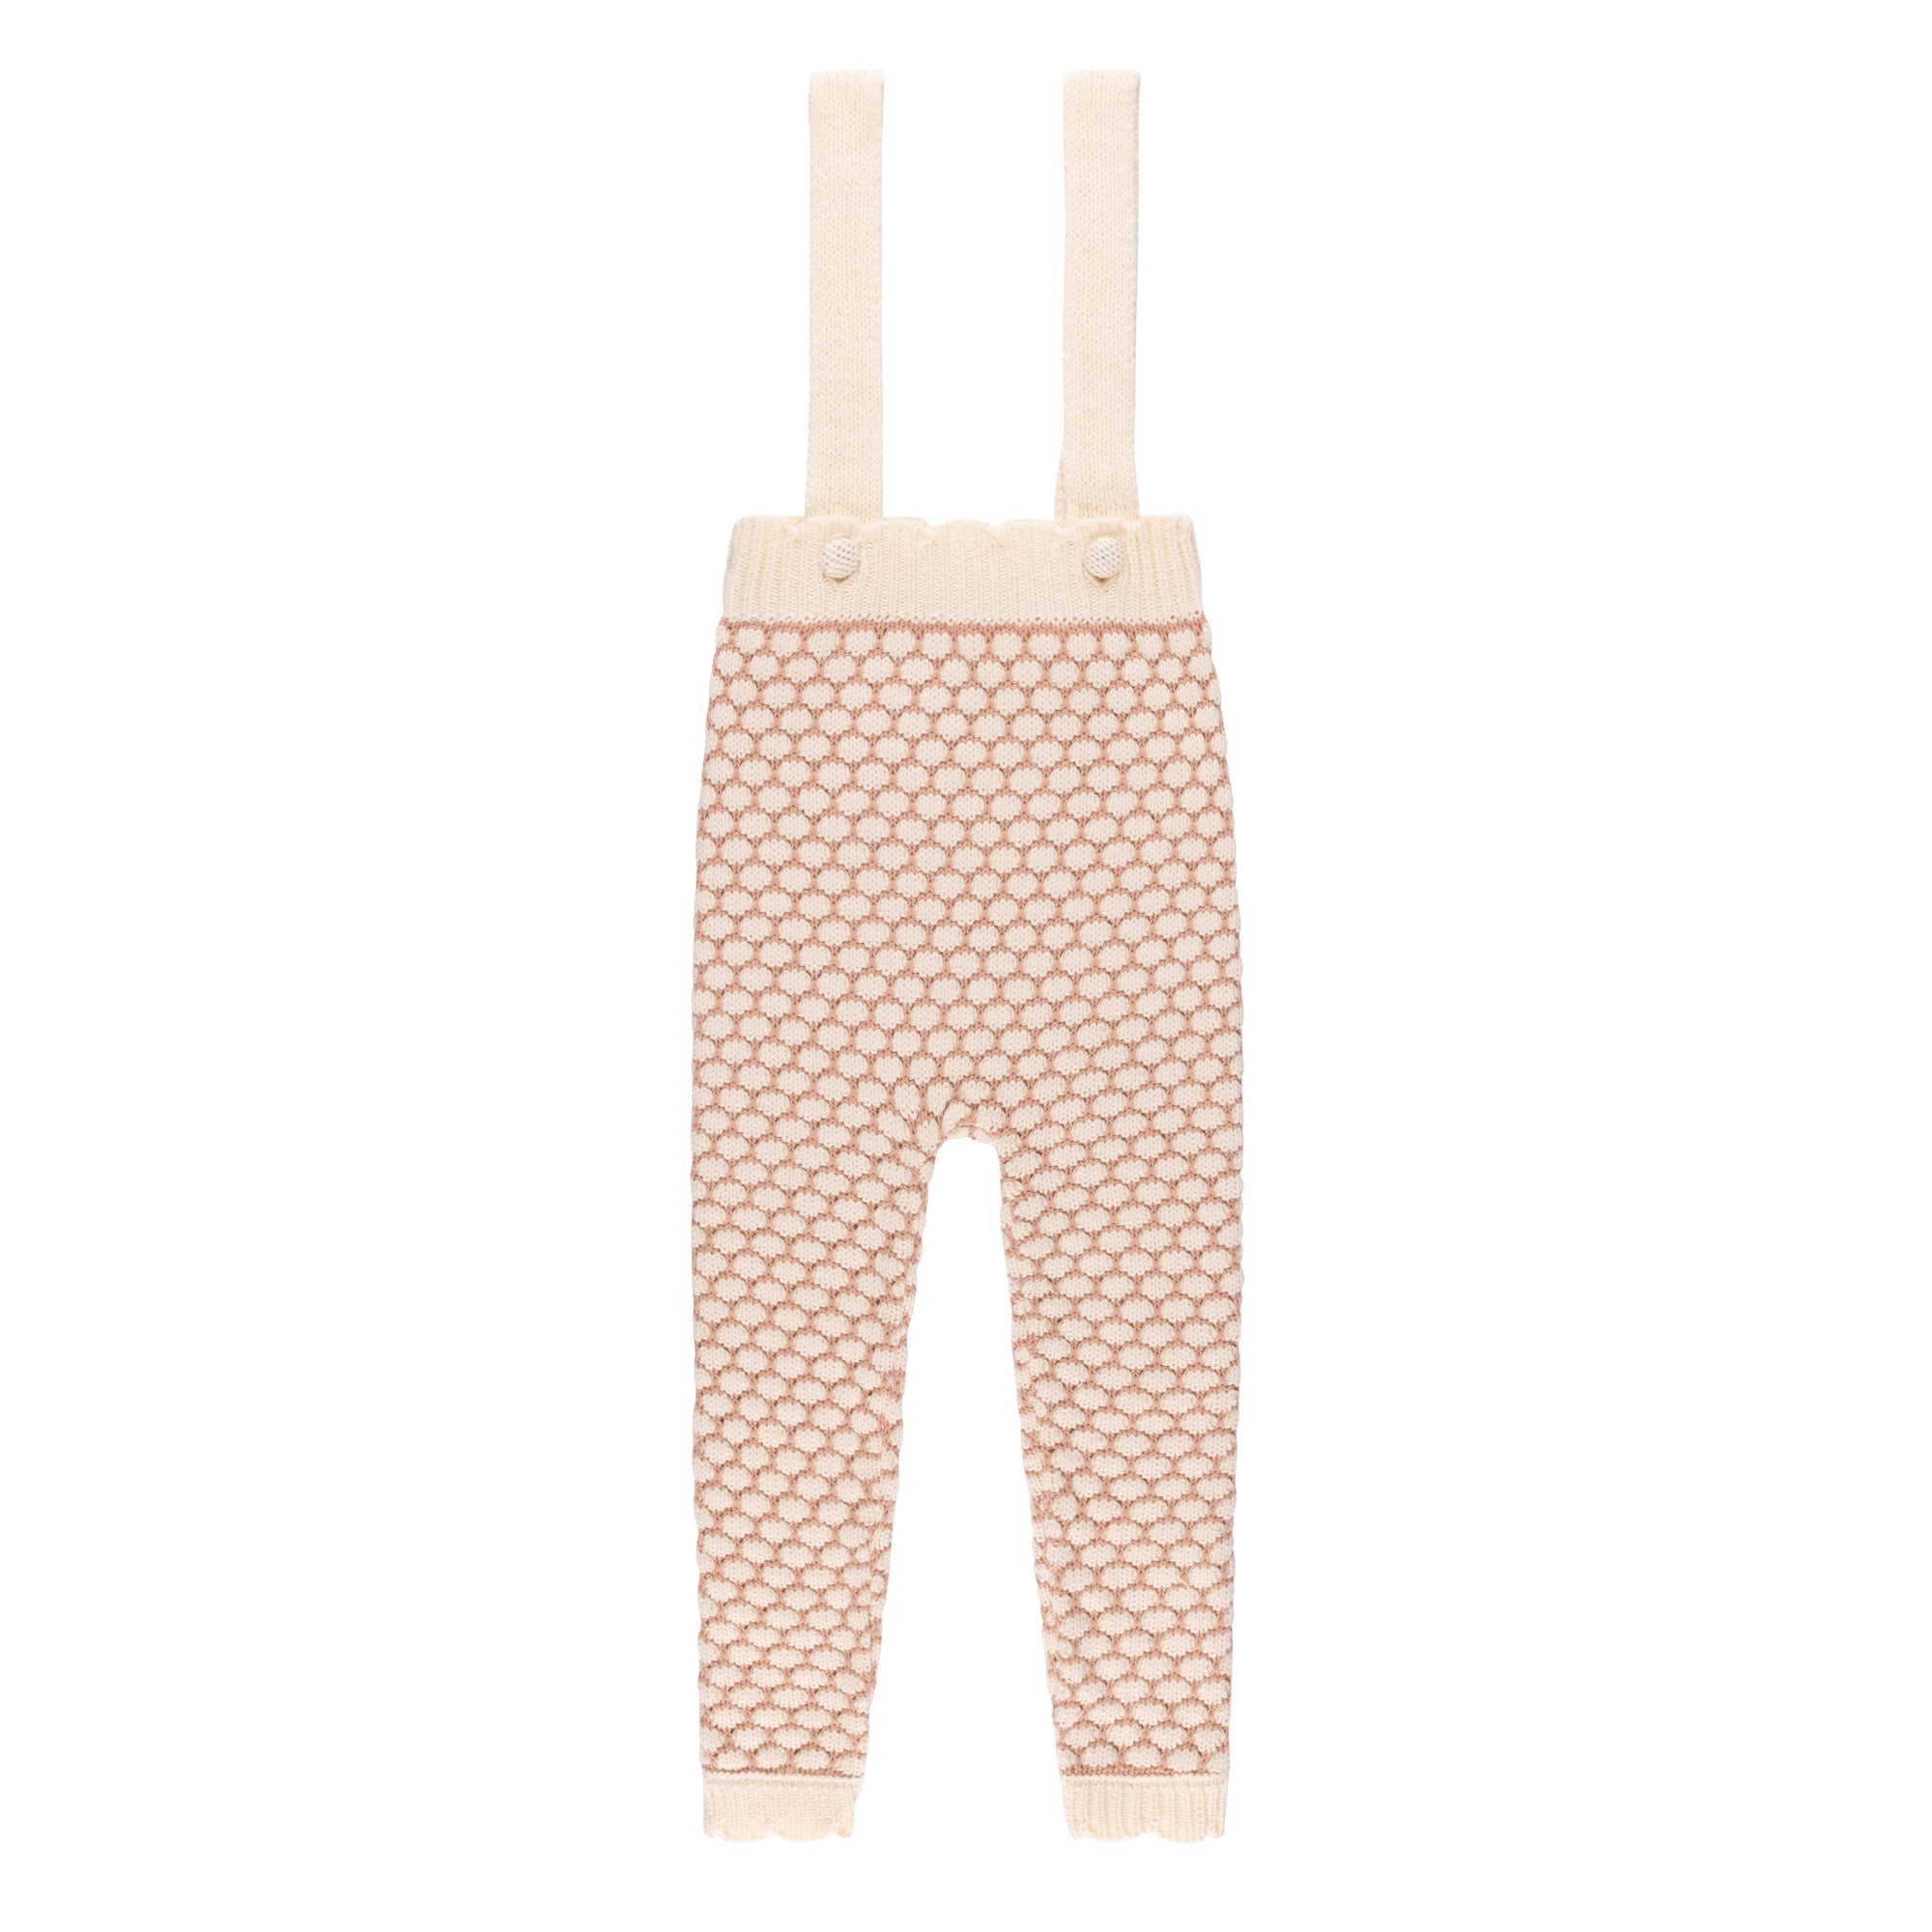 Popcorn Knit Collection - Overalls